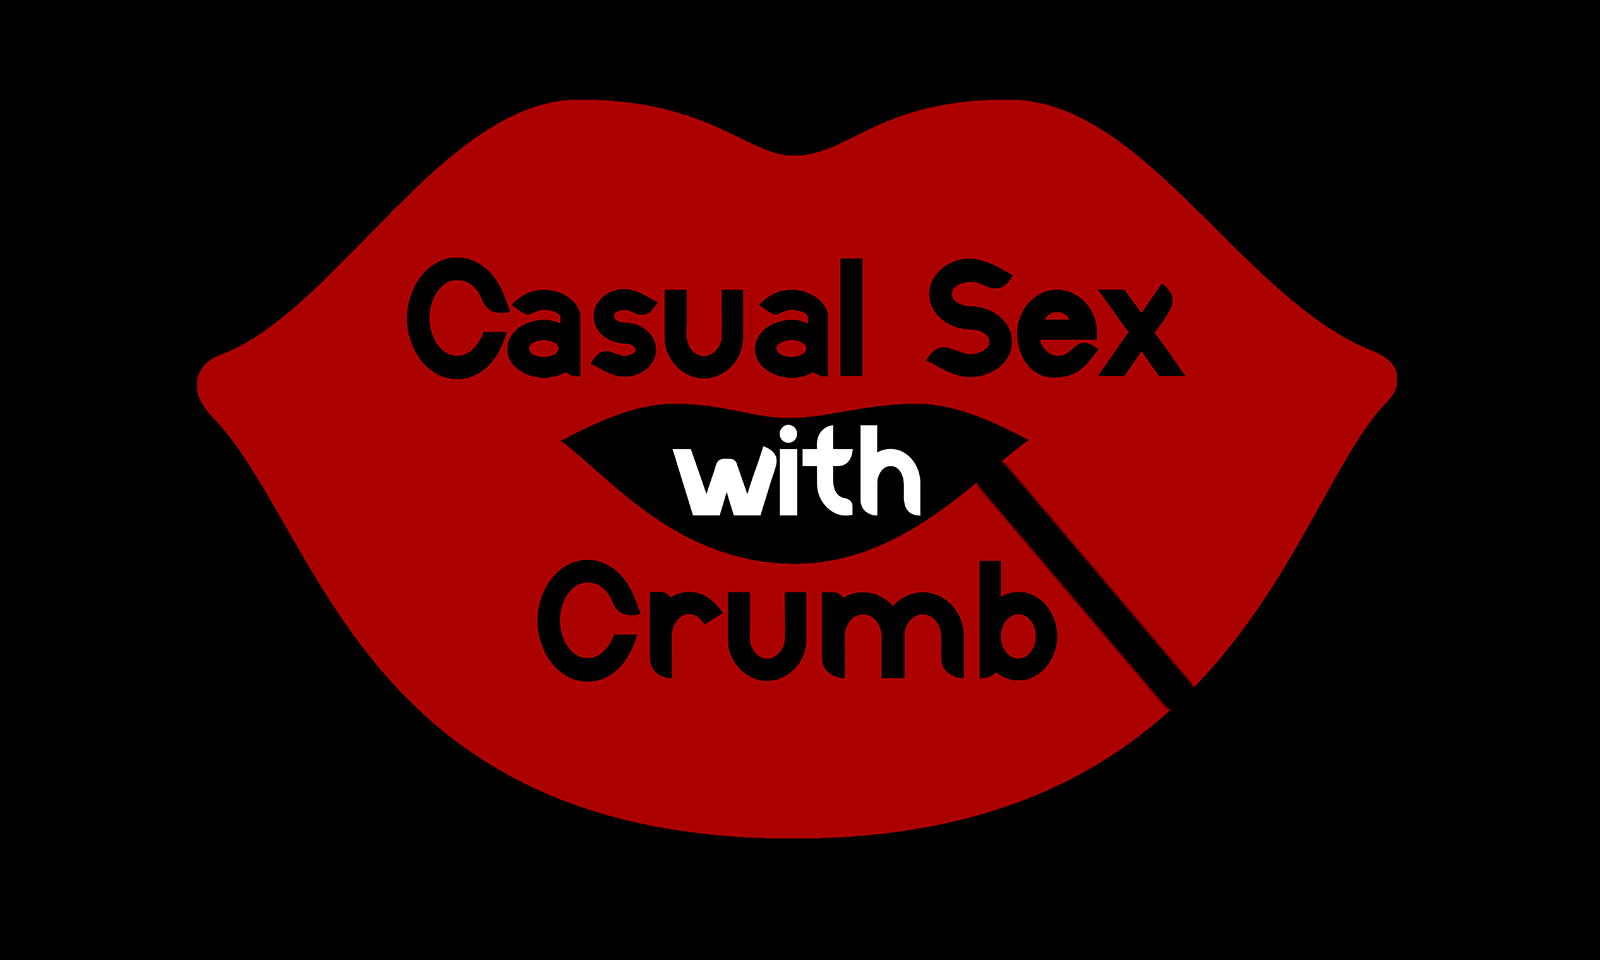 Looking For Sex+ Social Media? 'Casual Sex With Crumb' Has Tips